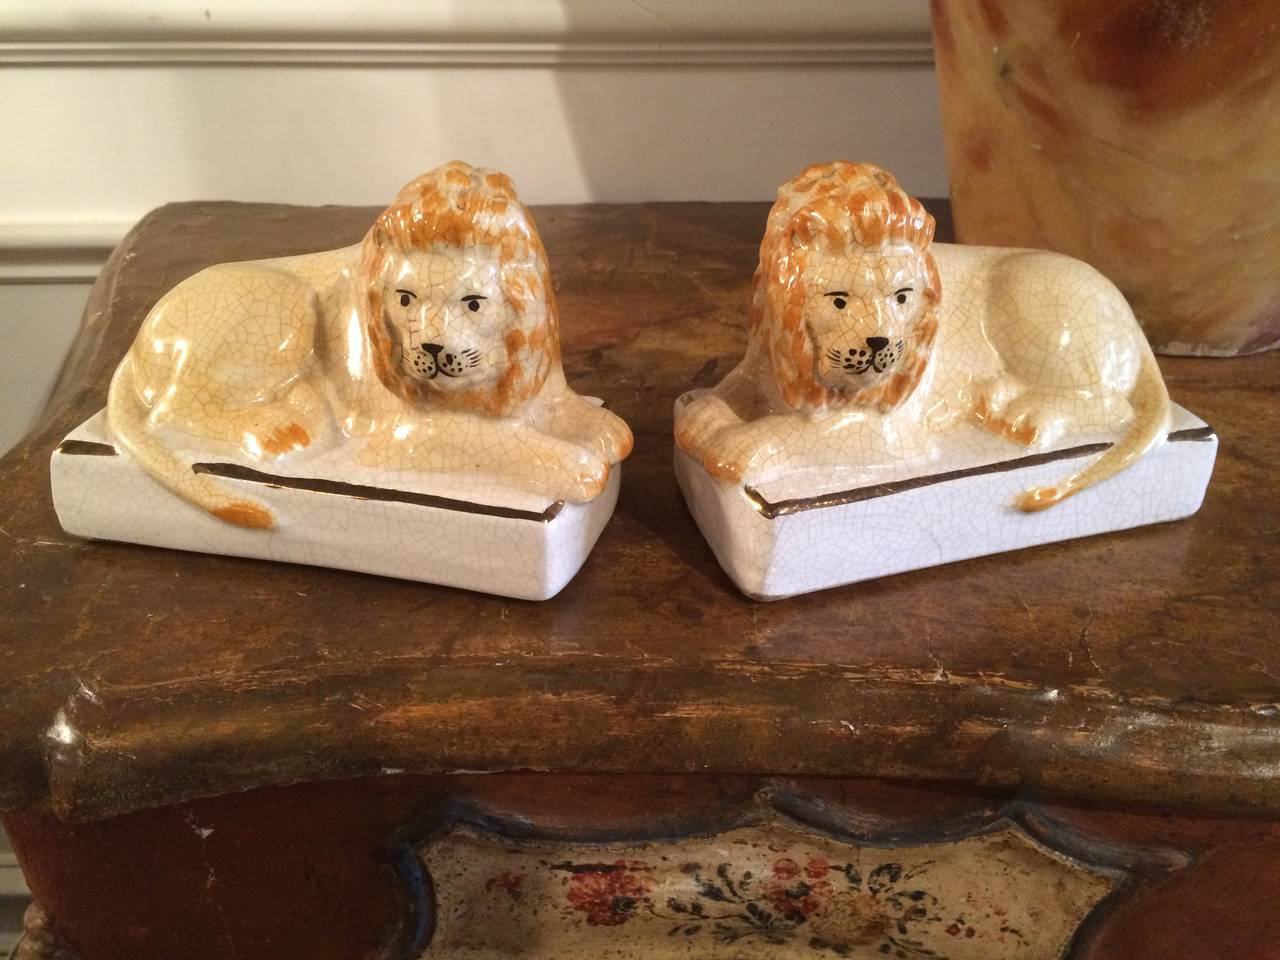 Charming pair of English Staffordshire porcelain lions, beautifully modeled on raised white plinths with gilt borders. Top quality painting, with wonderfully craquelure glaze. These are the best pair available.